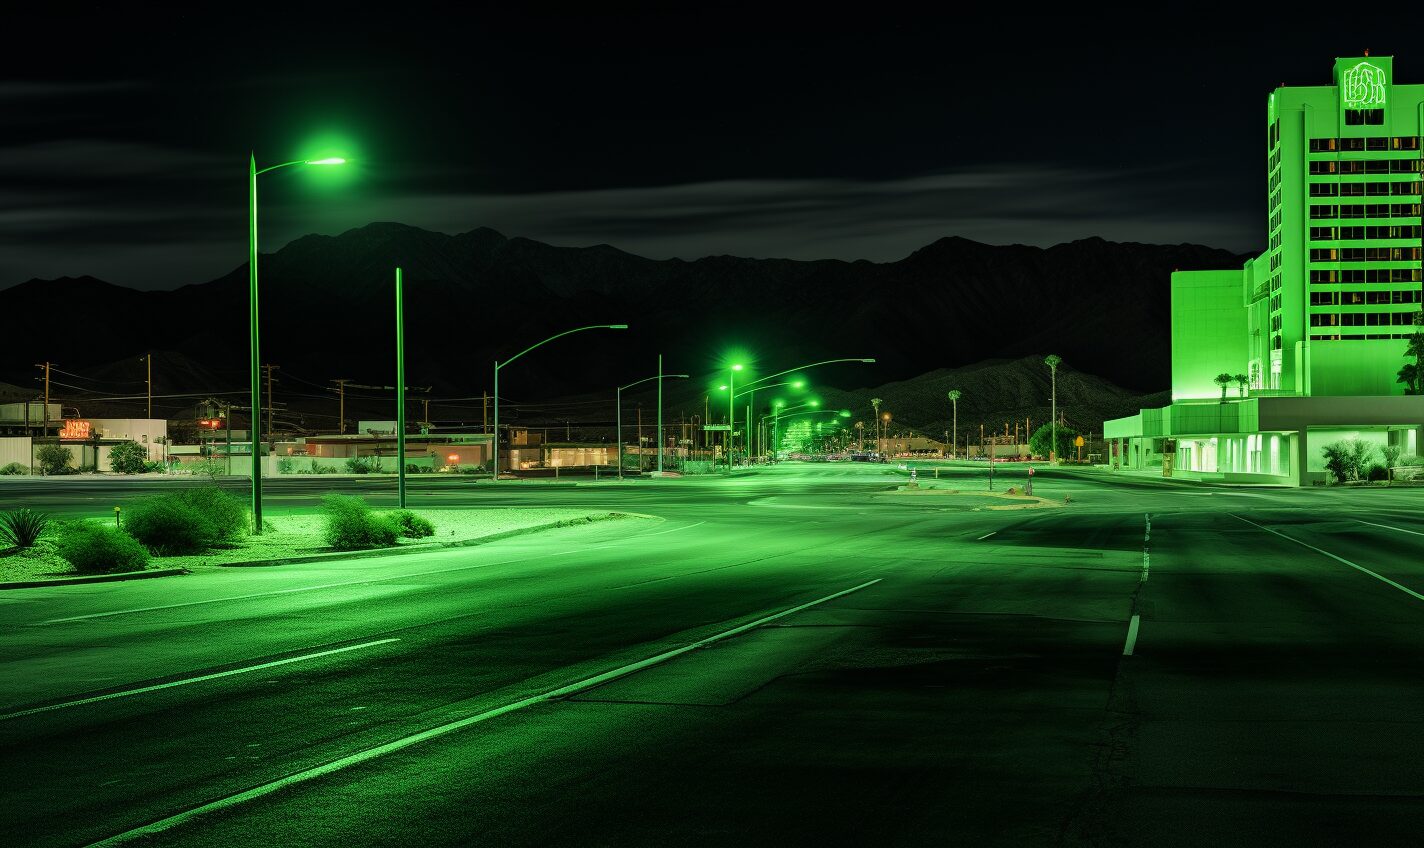 spring valley, nevada in a black and neon green glow